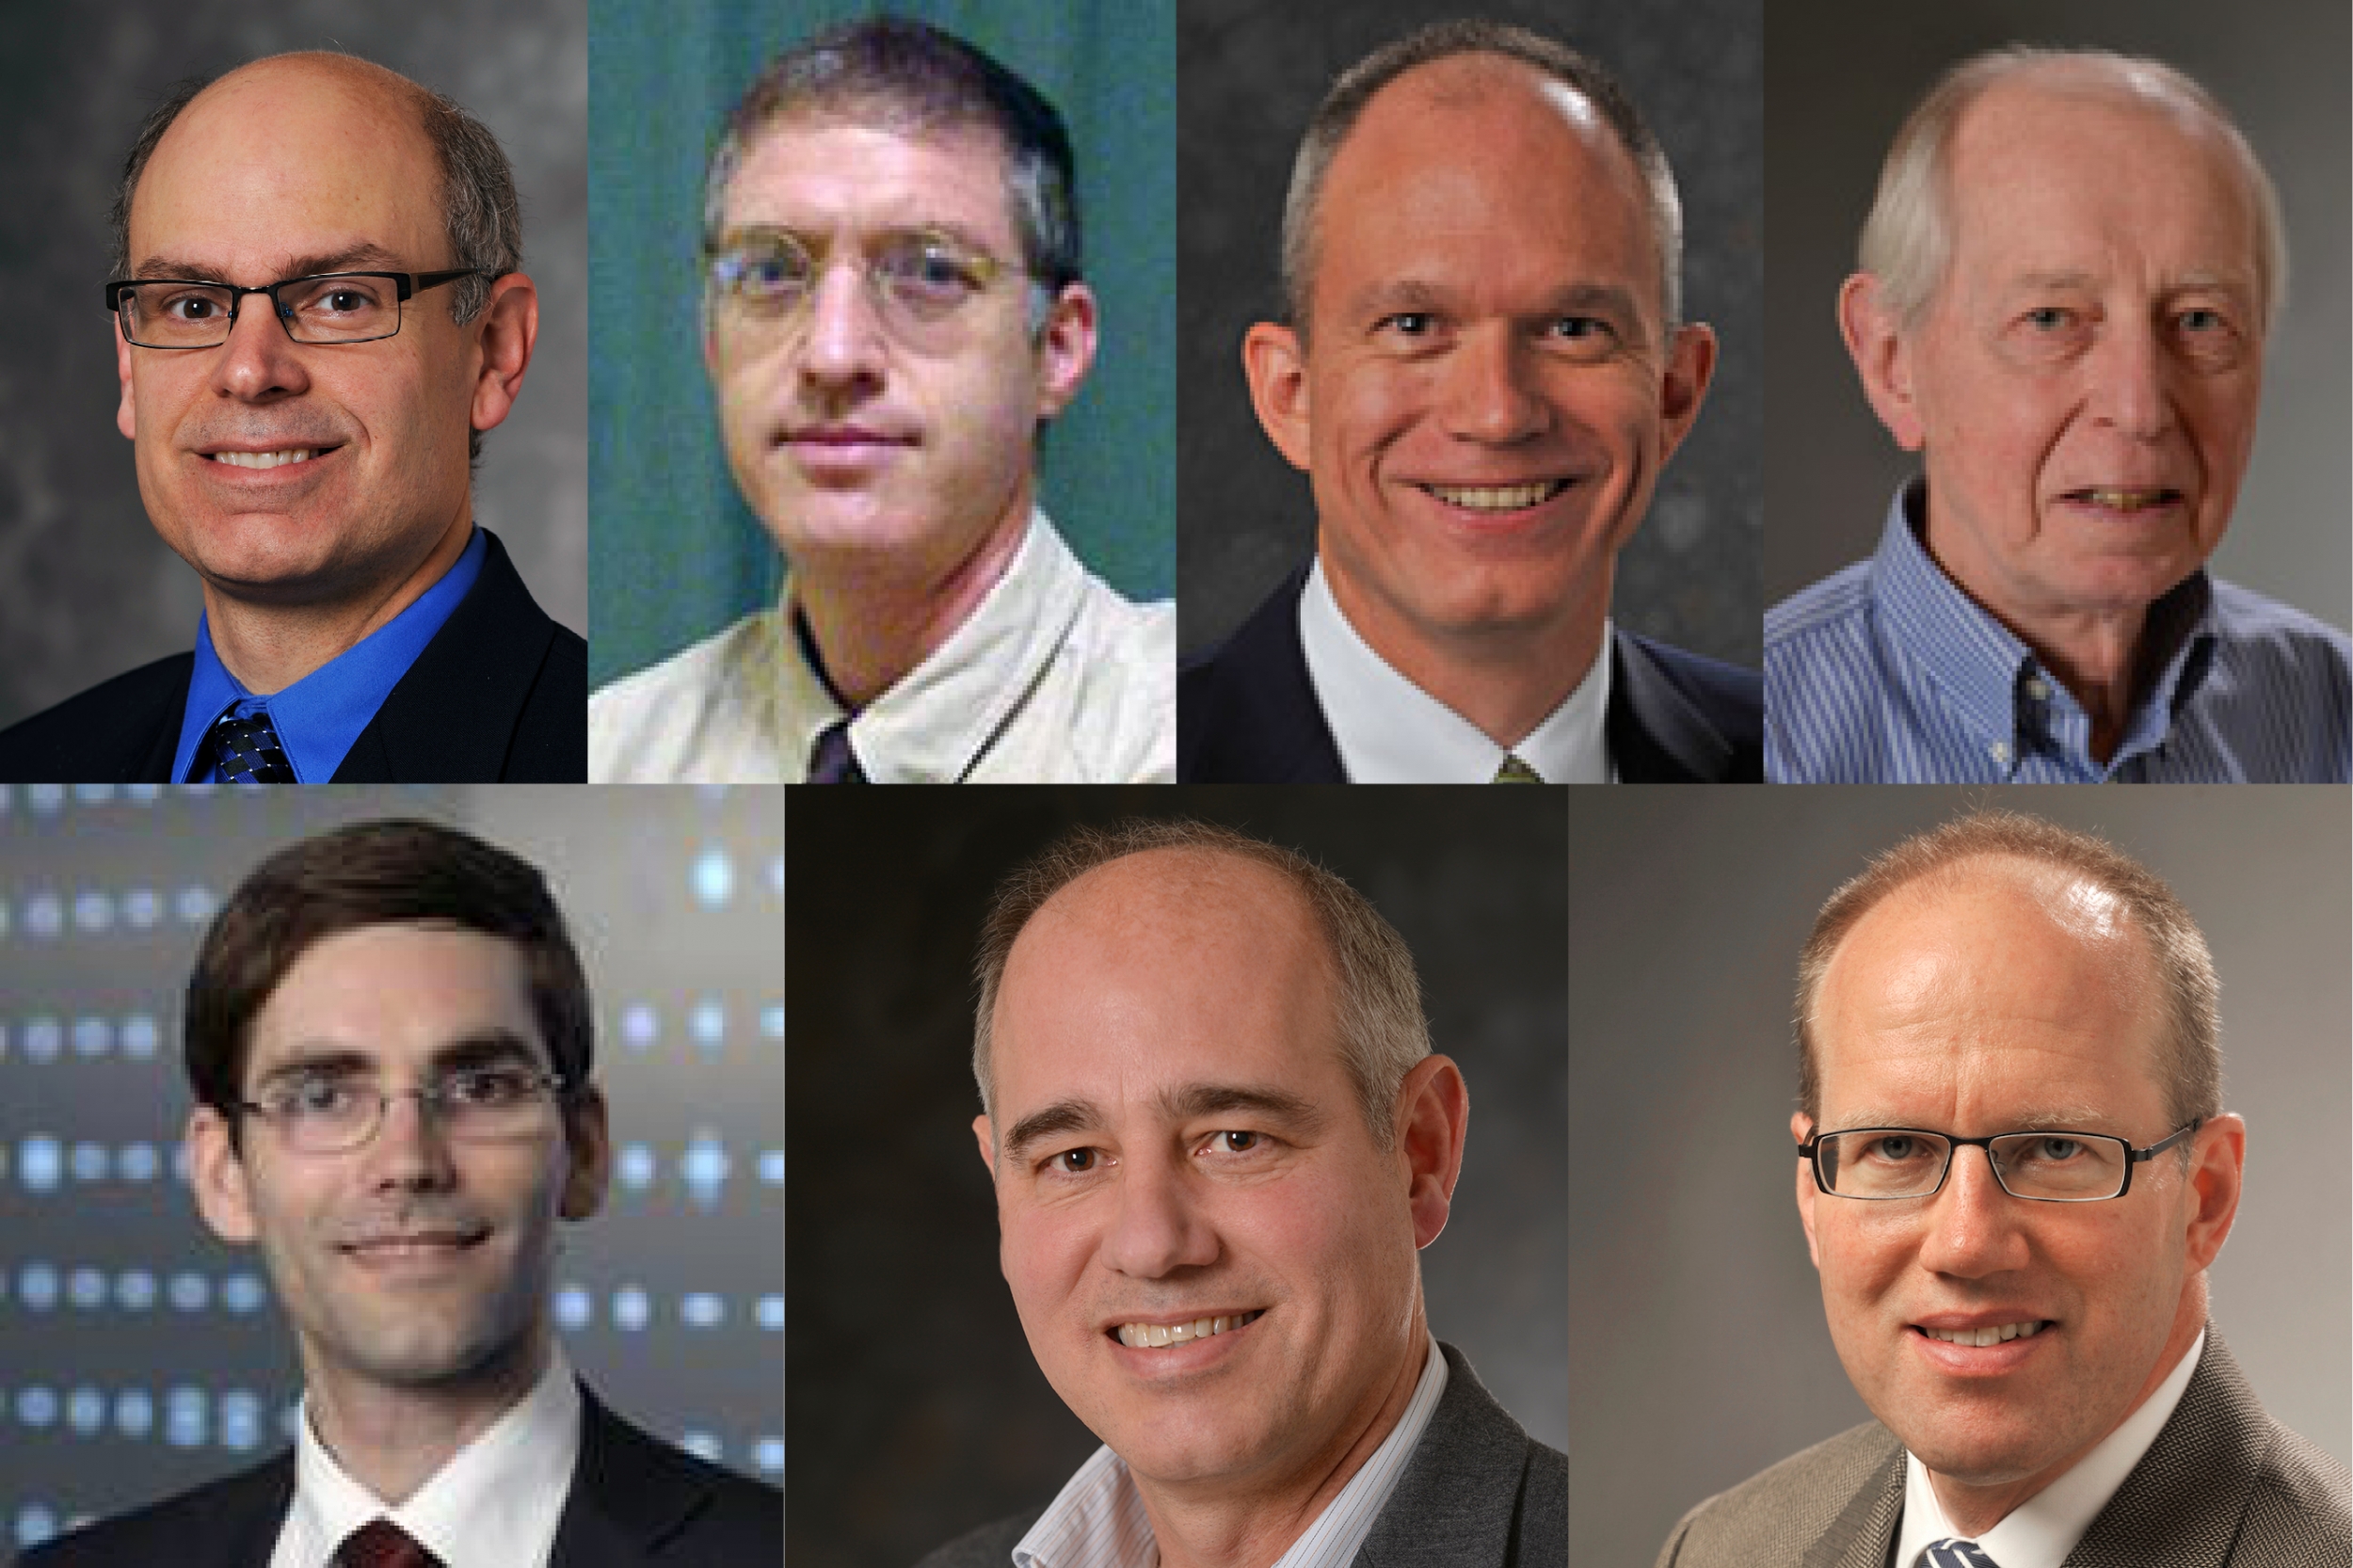 The 2017 IEEE fellows from MIT are, clockwise from top left, Robert Cunningham, Dov Dori, Paul Juodawlkis, Daniel Oates, Steven Smith, Frank Robey, and Tomás Palacios.